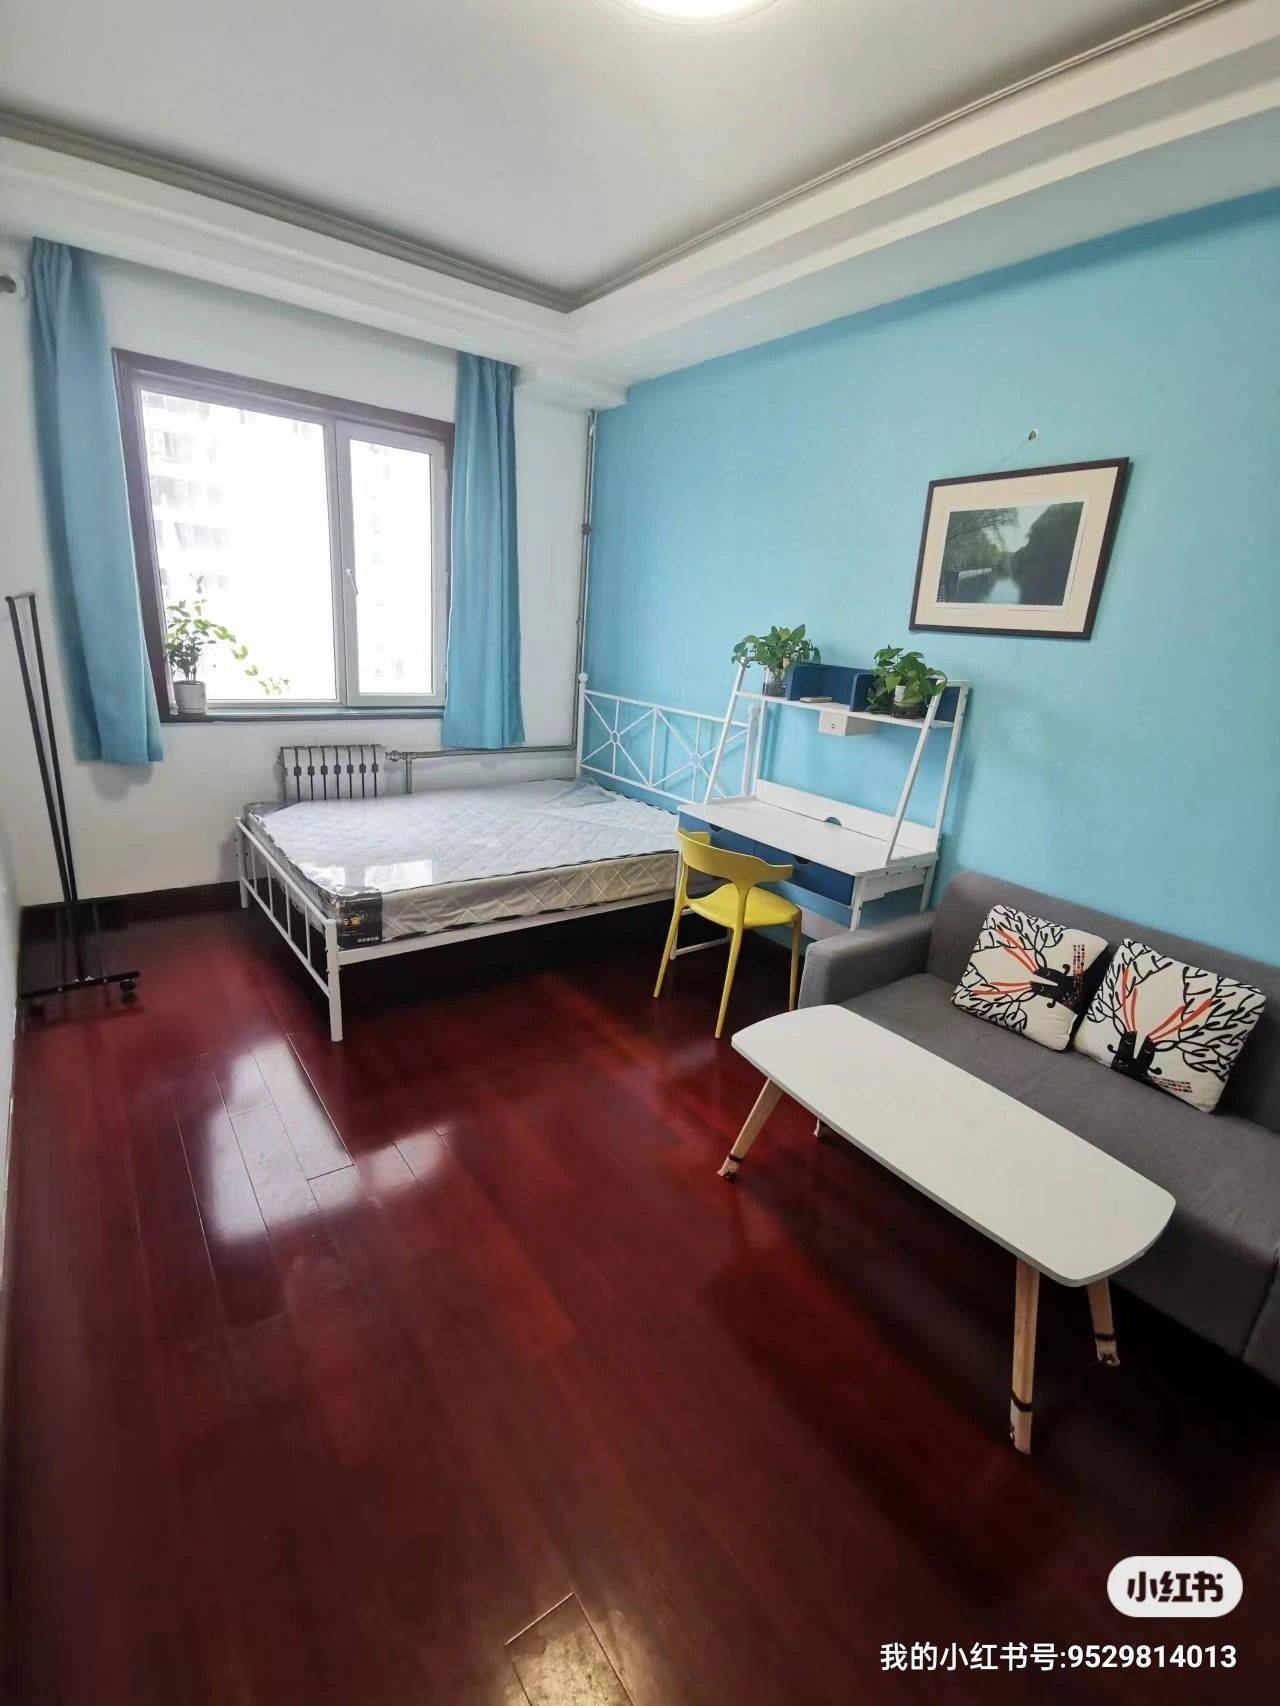 Beijing-Changping-line 8,👯‍♀️,Long & Short Term,Sublet,Replacement,Shared Apartment,LGBTQ Friendly